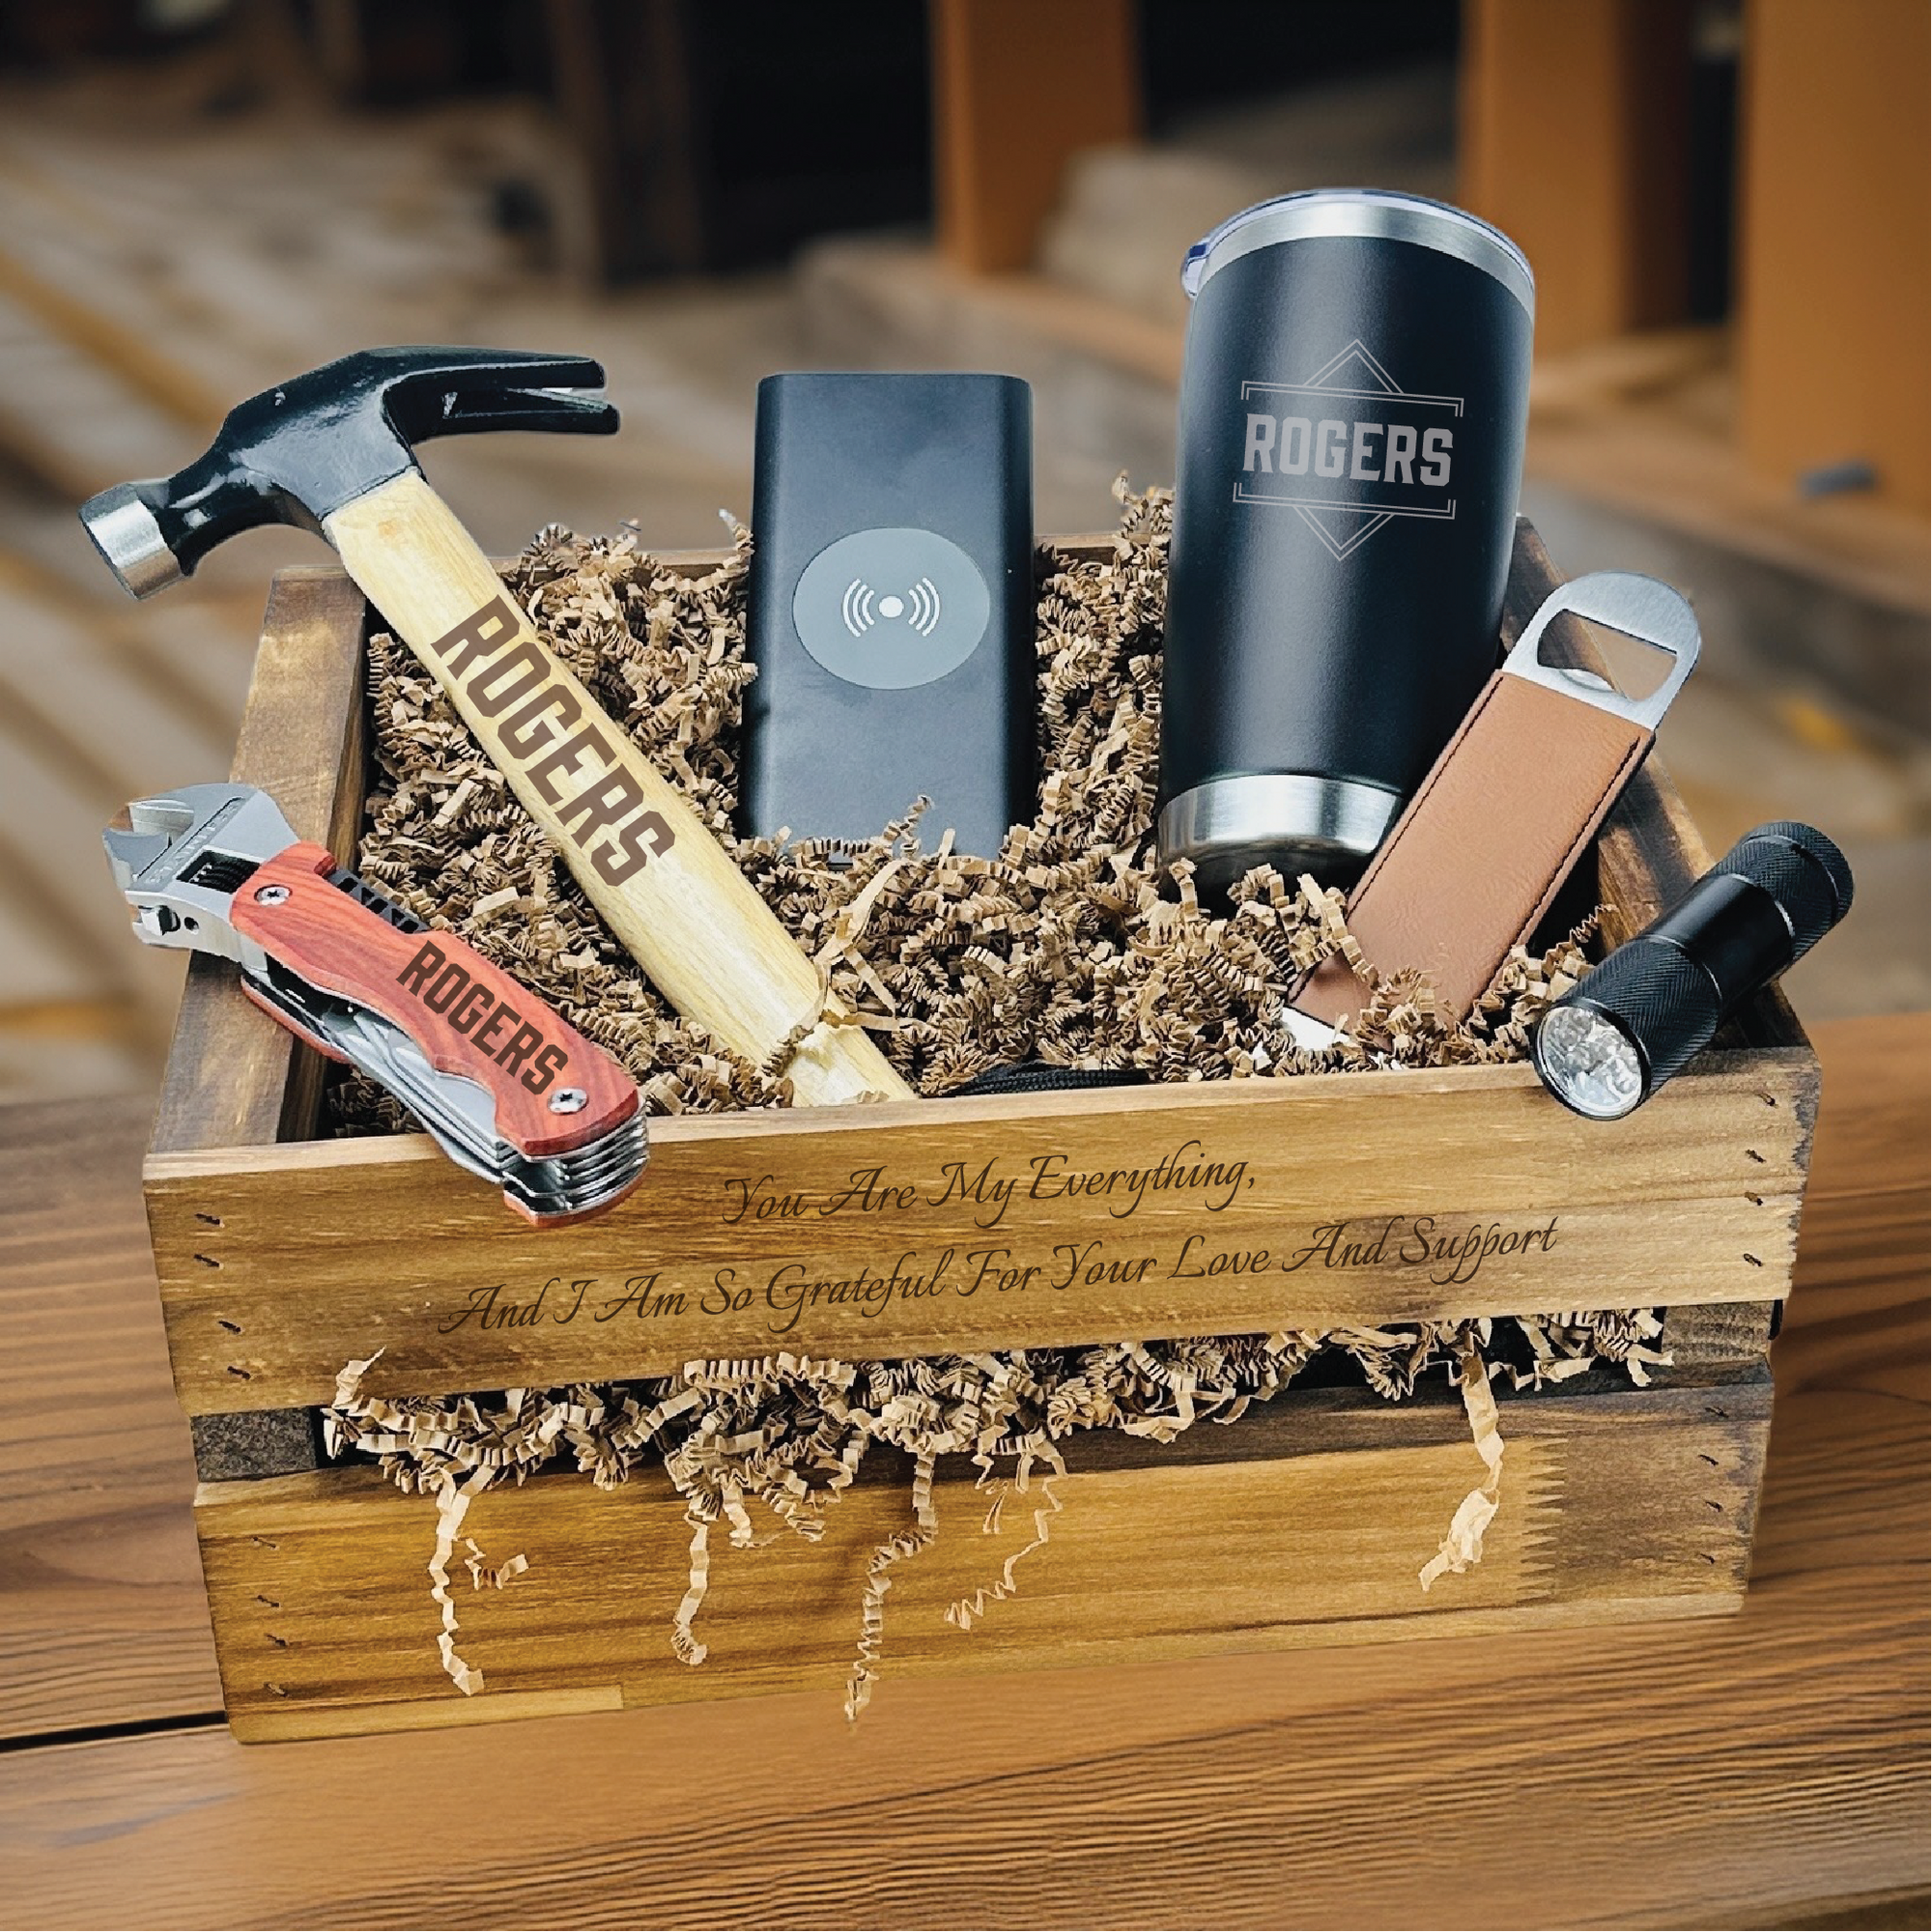 Handy Man Gift Set - Personalized Toolbox Gift Set - Unique Engravings, Portable Charger, Flashlight & More!